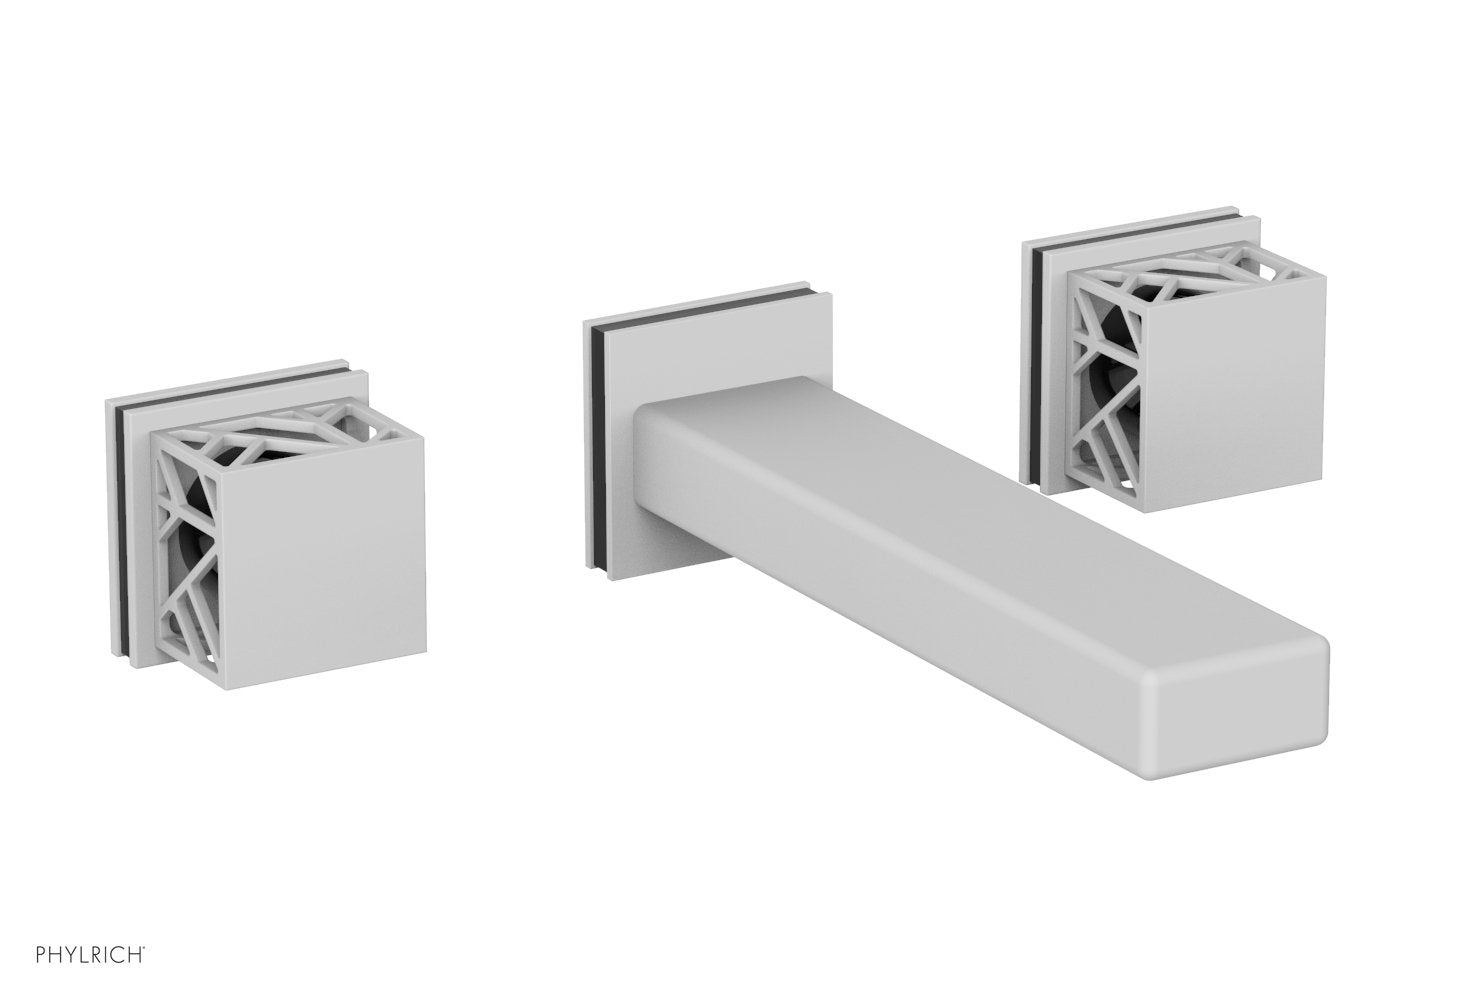 Phylrich JOLIE Wall Lavatory Set - Square Handles with "Black" Accents